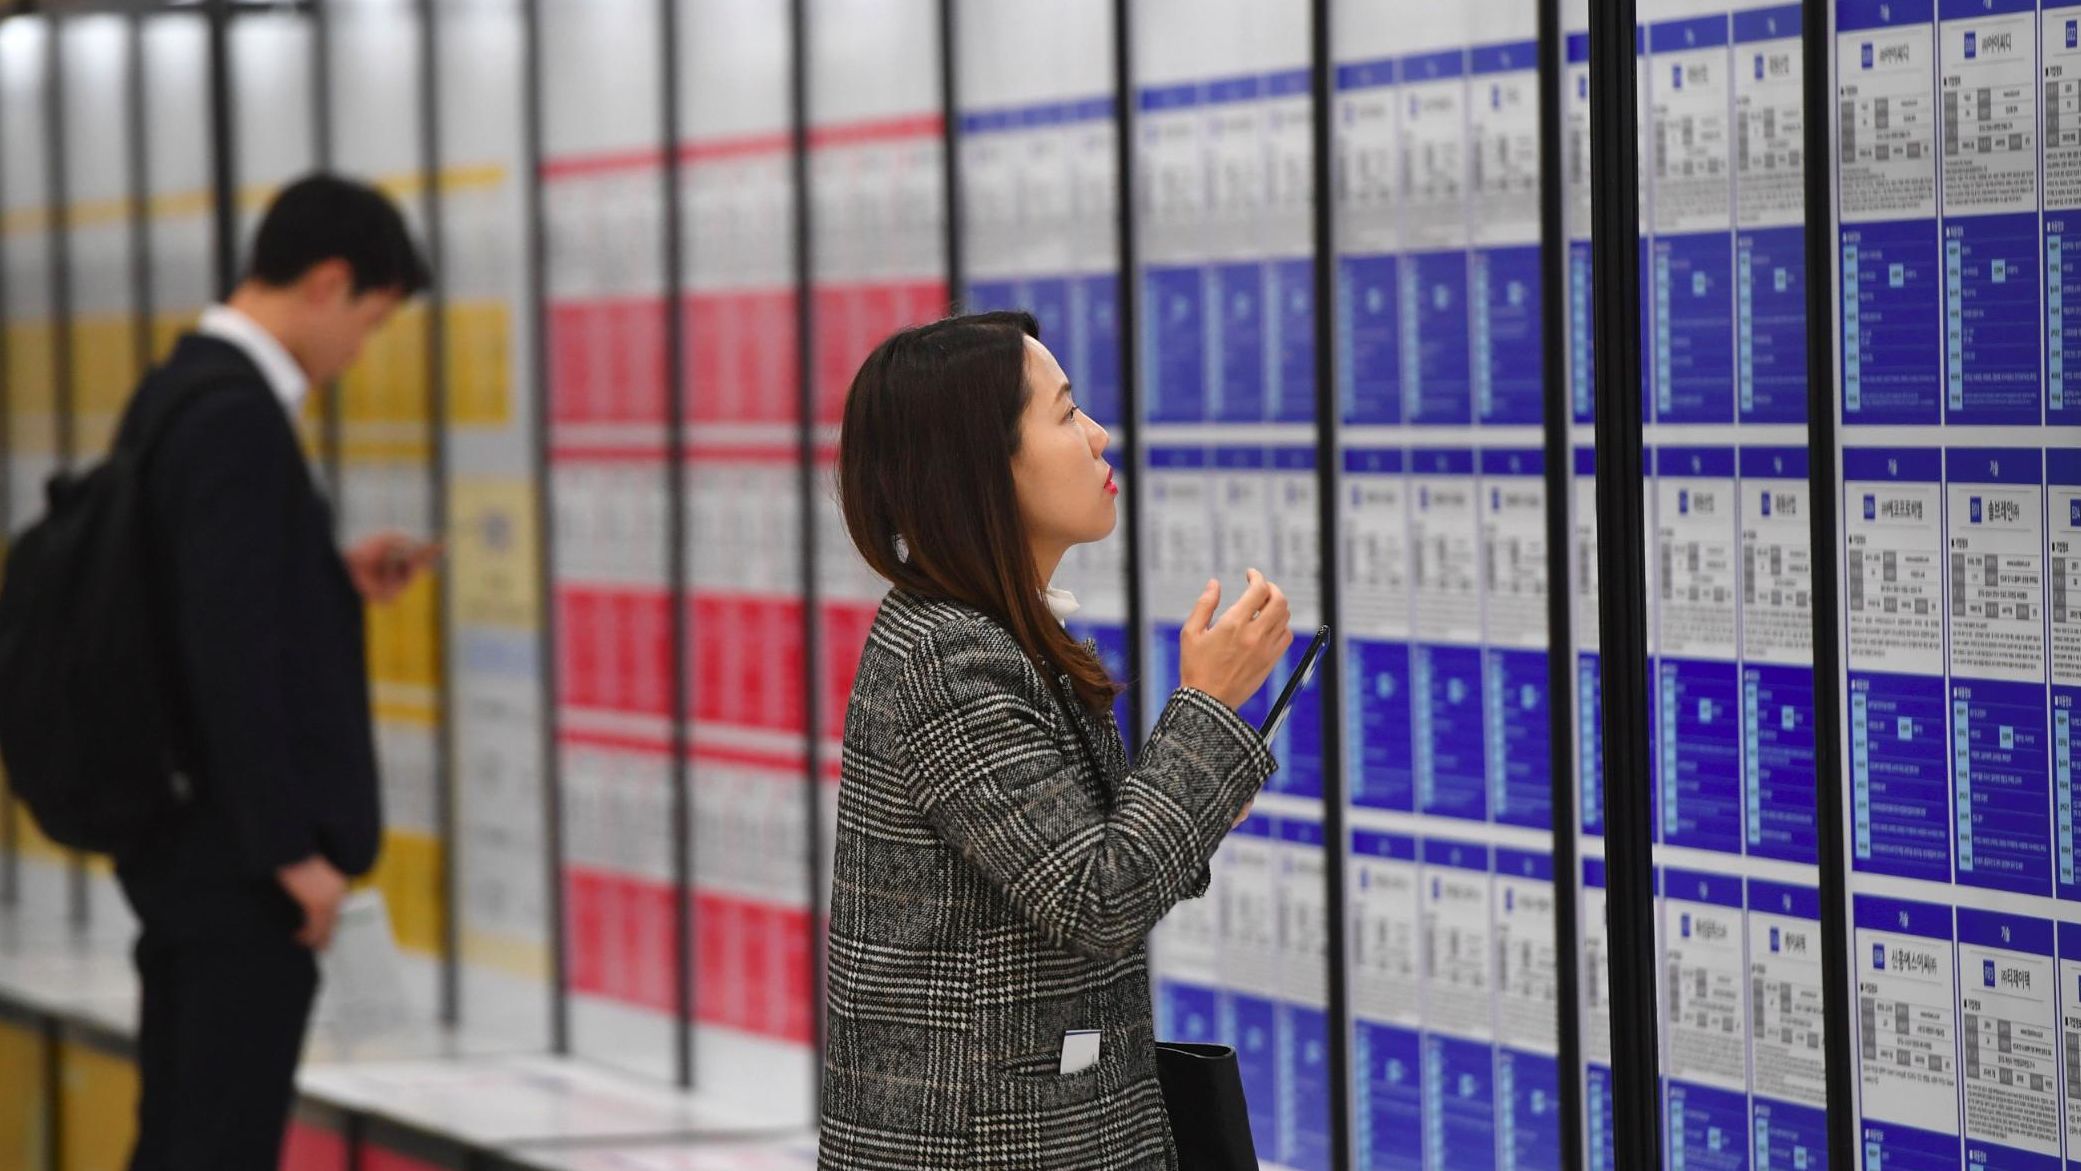 A woman looks at notices during a jobs fair in Seoul. Women often struggle to find a foothold in South Korea's male-dominated corporate culture and a series of firms have been caught using sexist recruitment targets to keep it that way.